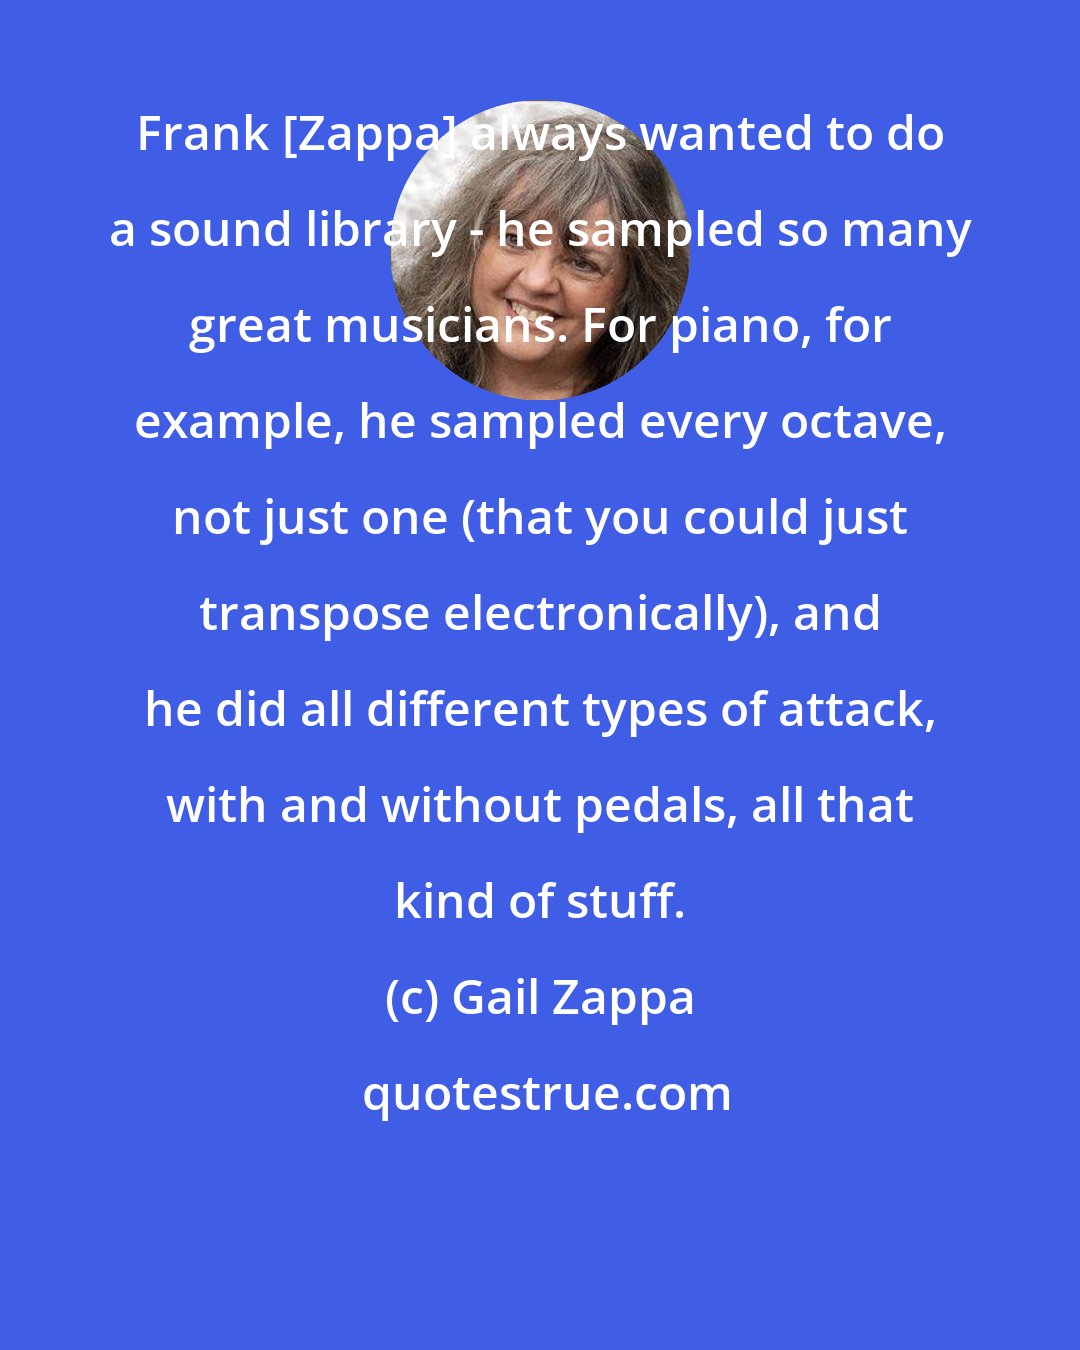 Gail Zappa: Frank [Zappa] always wanted to do a sound library - he sampled so many great musicians. For piano, for example, he sampled every octave, not just one (that you could just transpose electronically), and he did all different types of attack, with and without pedals, all that kind of stuff.